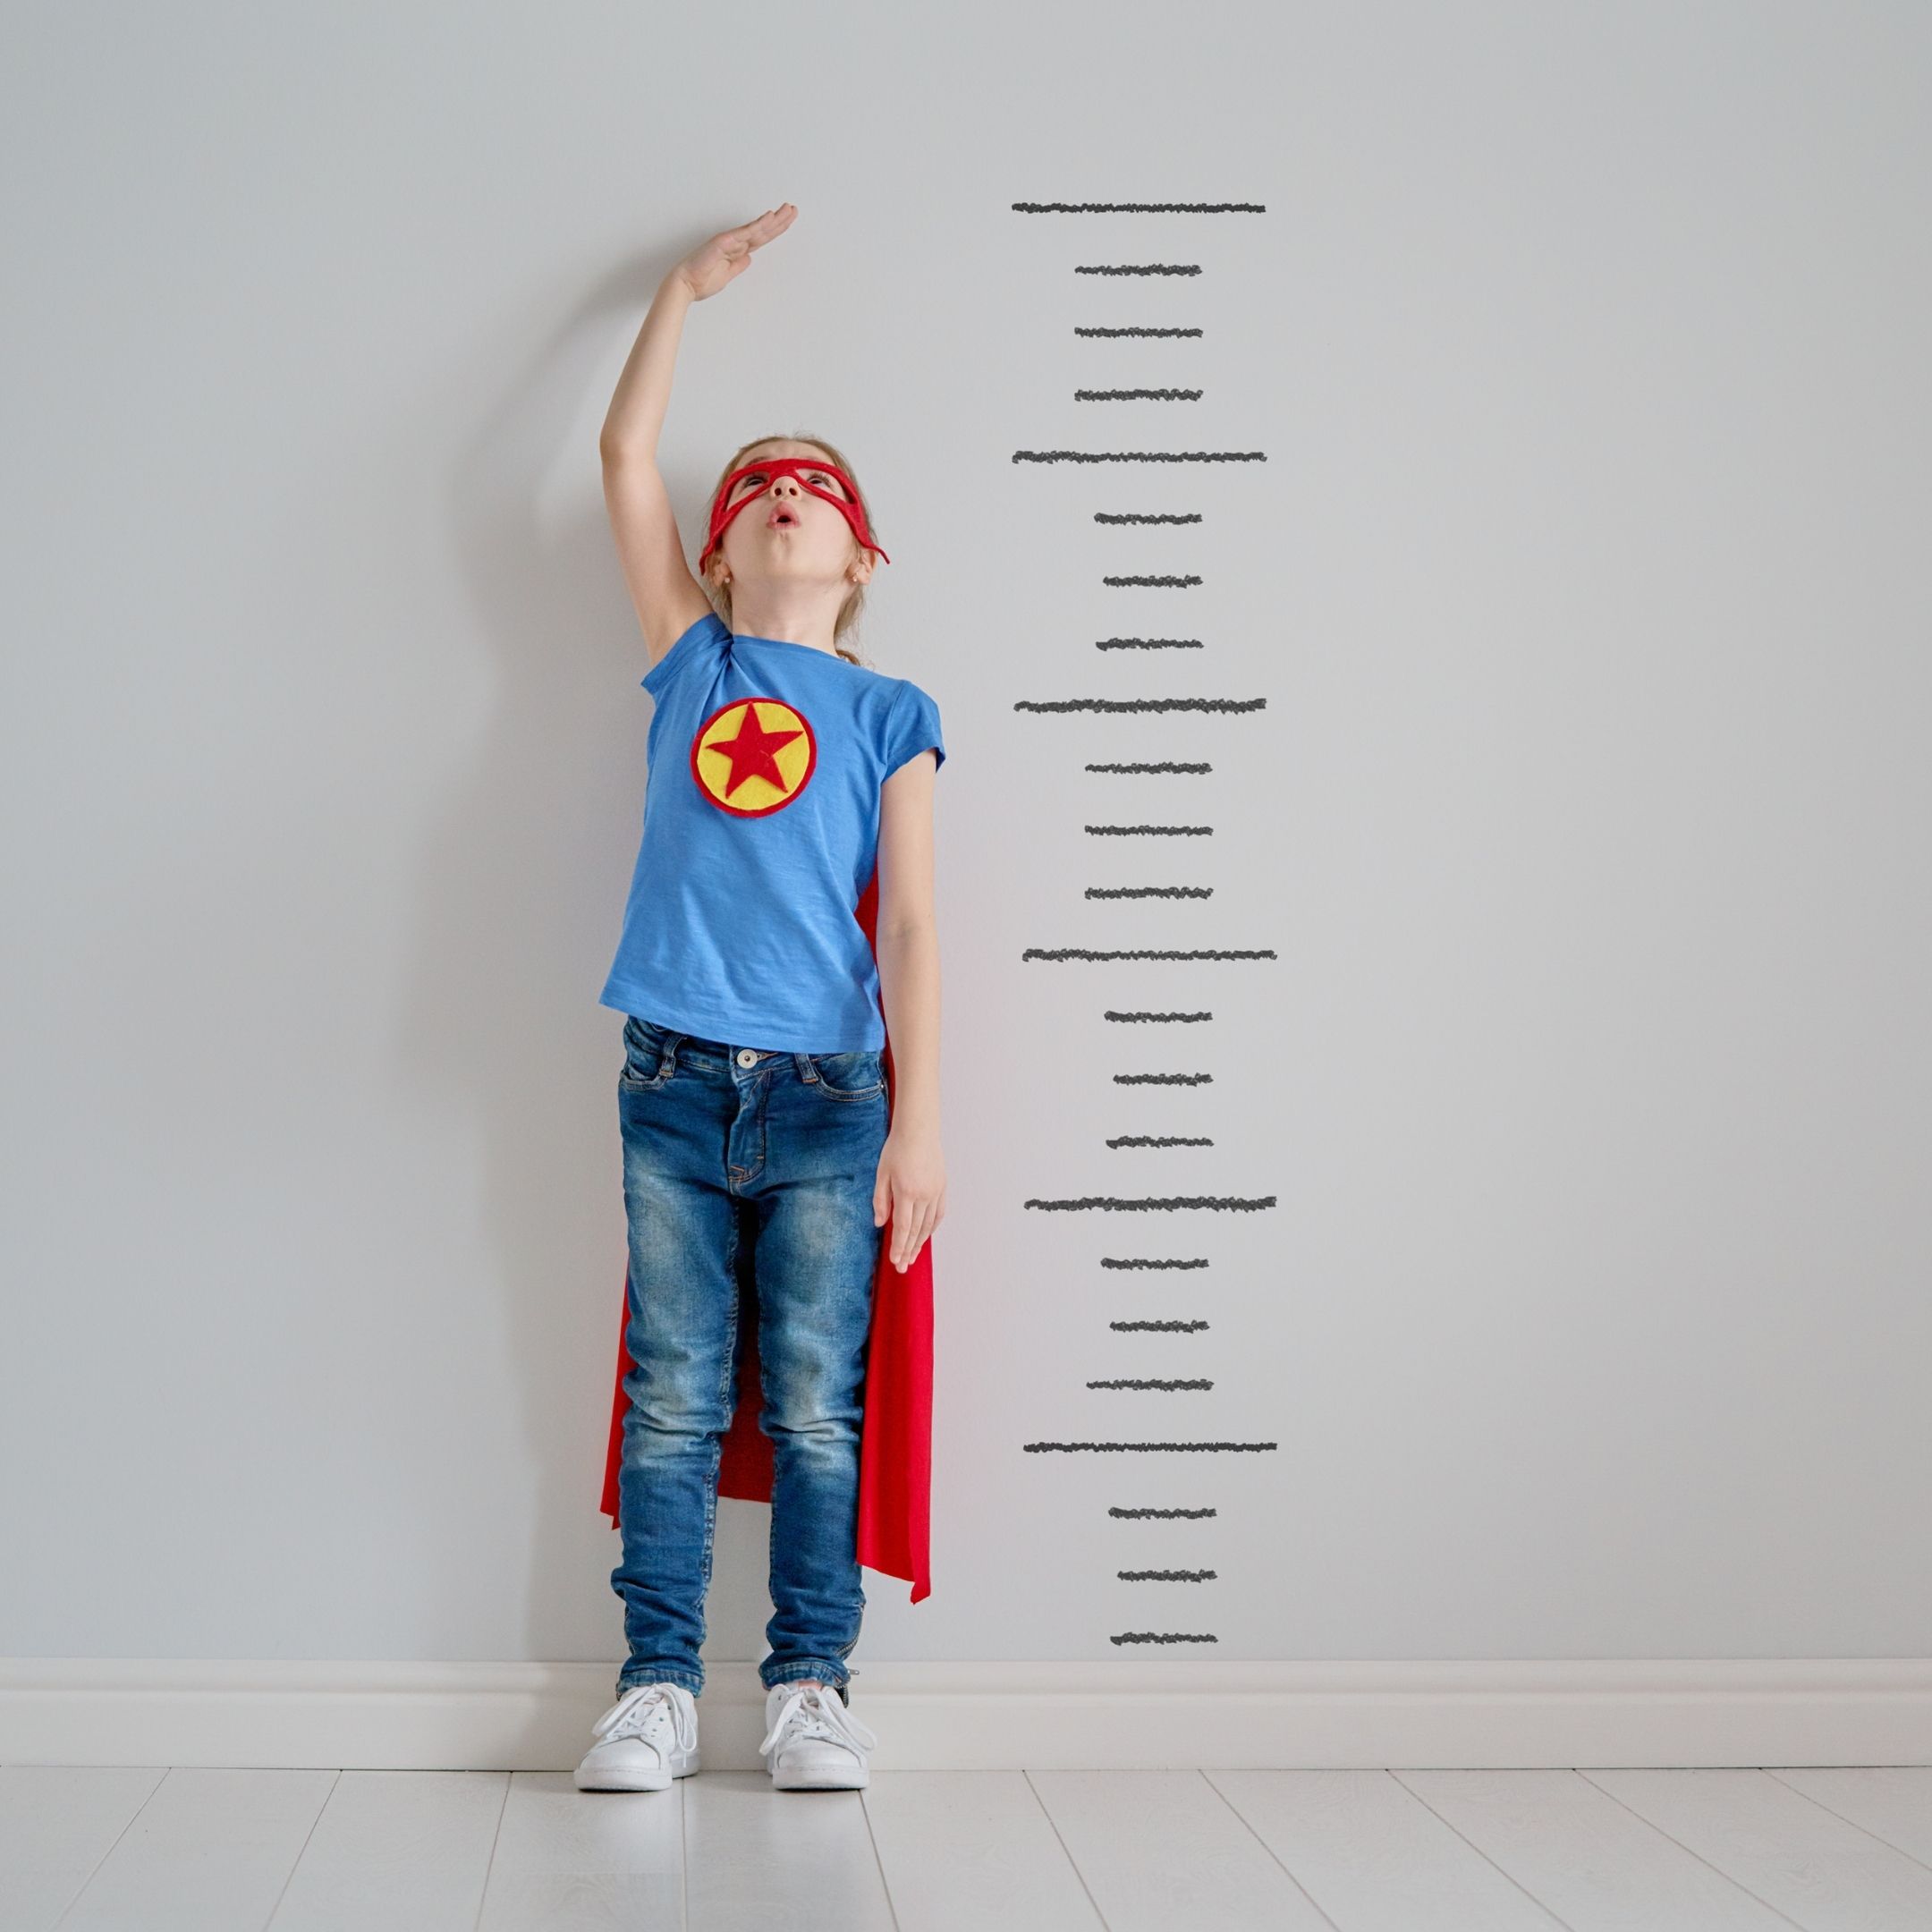 Boy measuring his height. Hire a child support lawyer in medina for child support that is appropriate as your child grows.